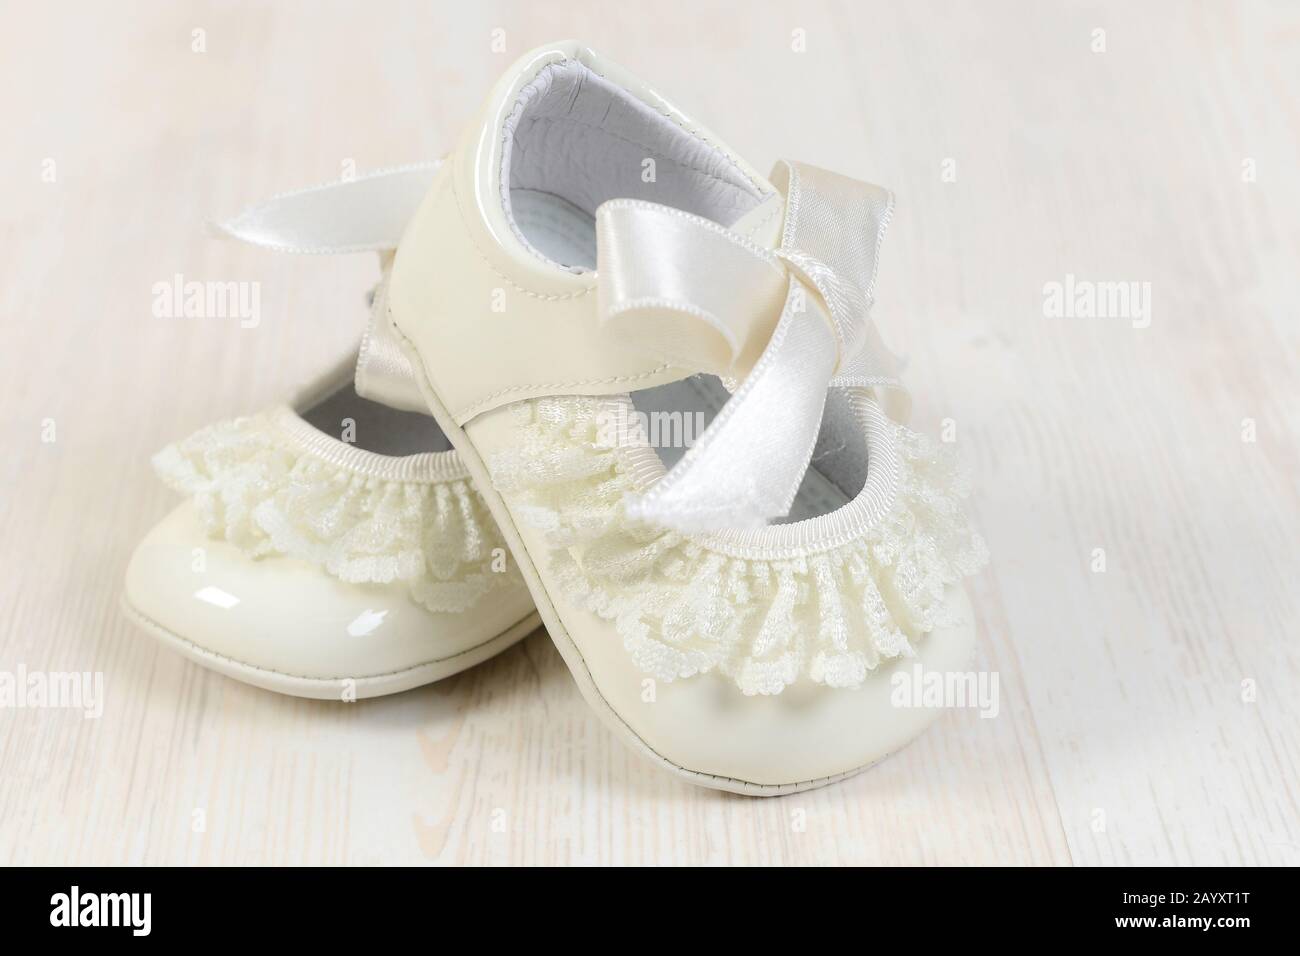 Pair of white baby shoes Stock Photo